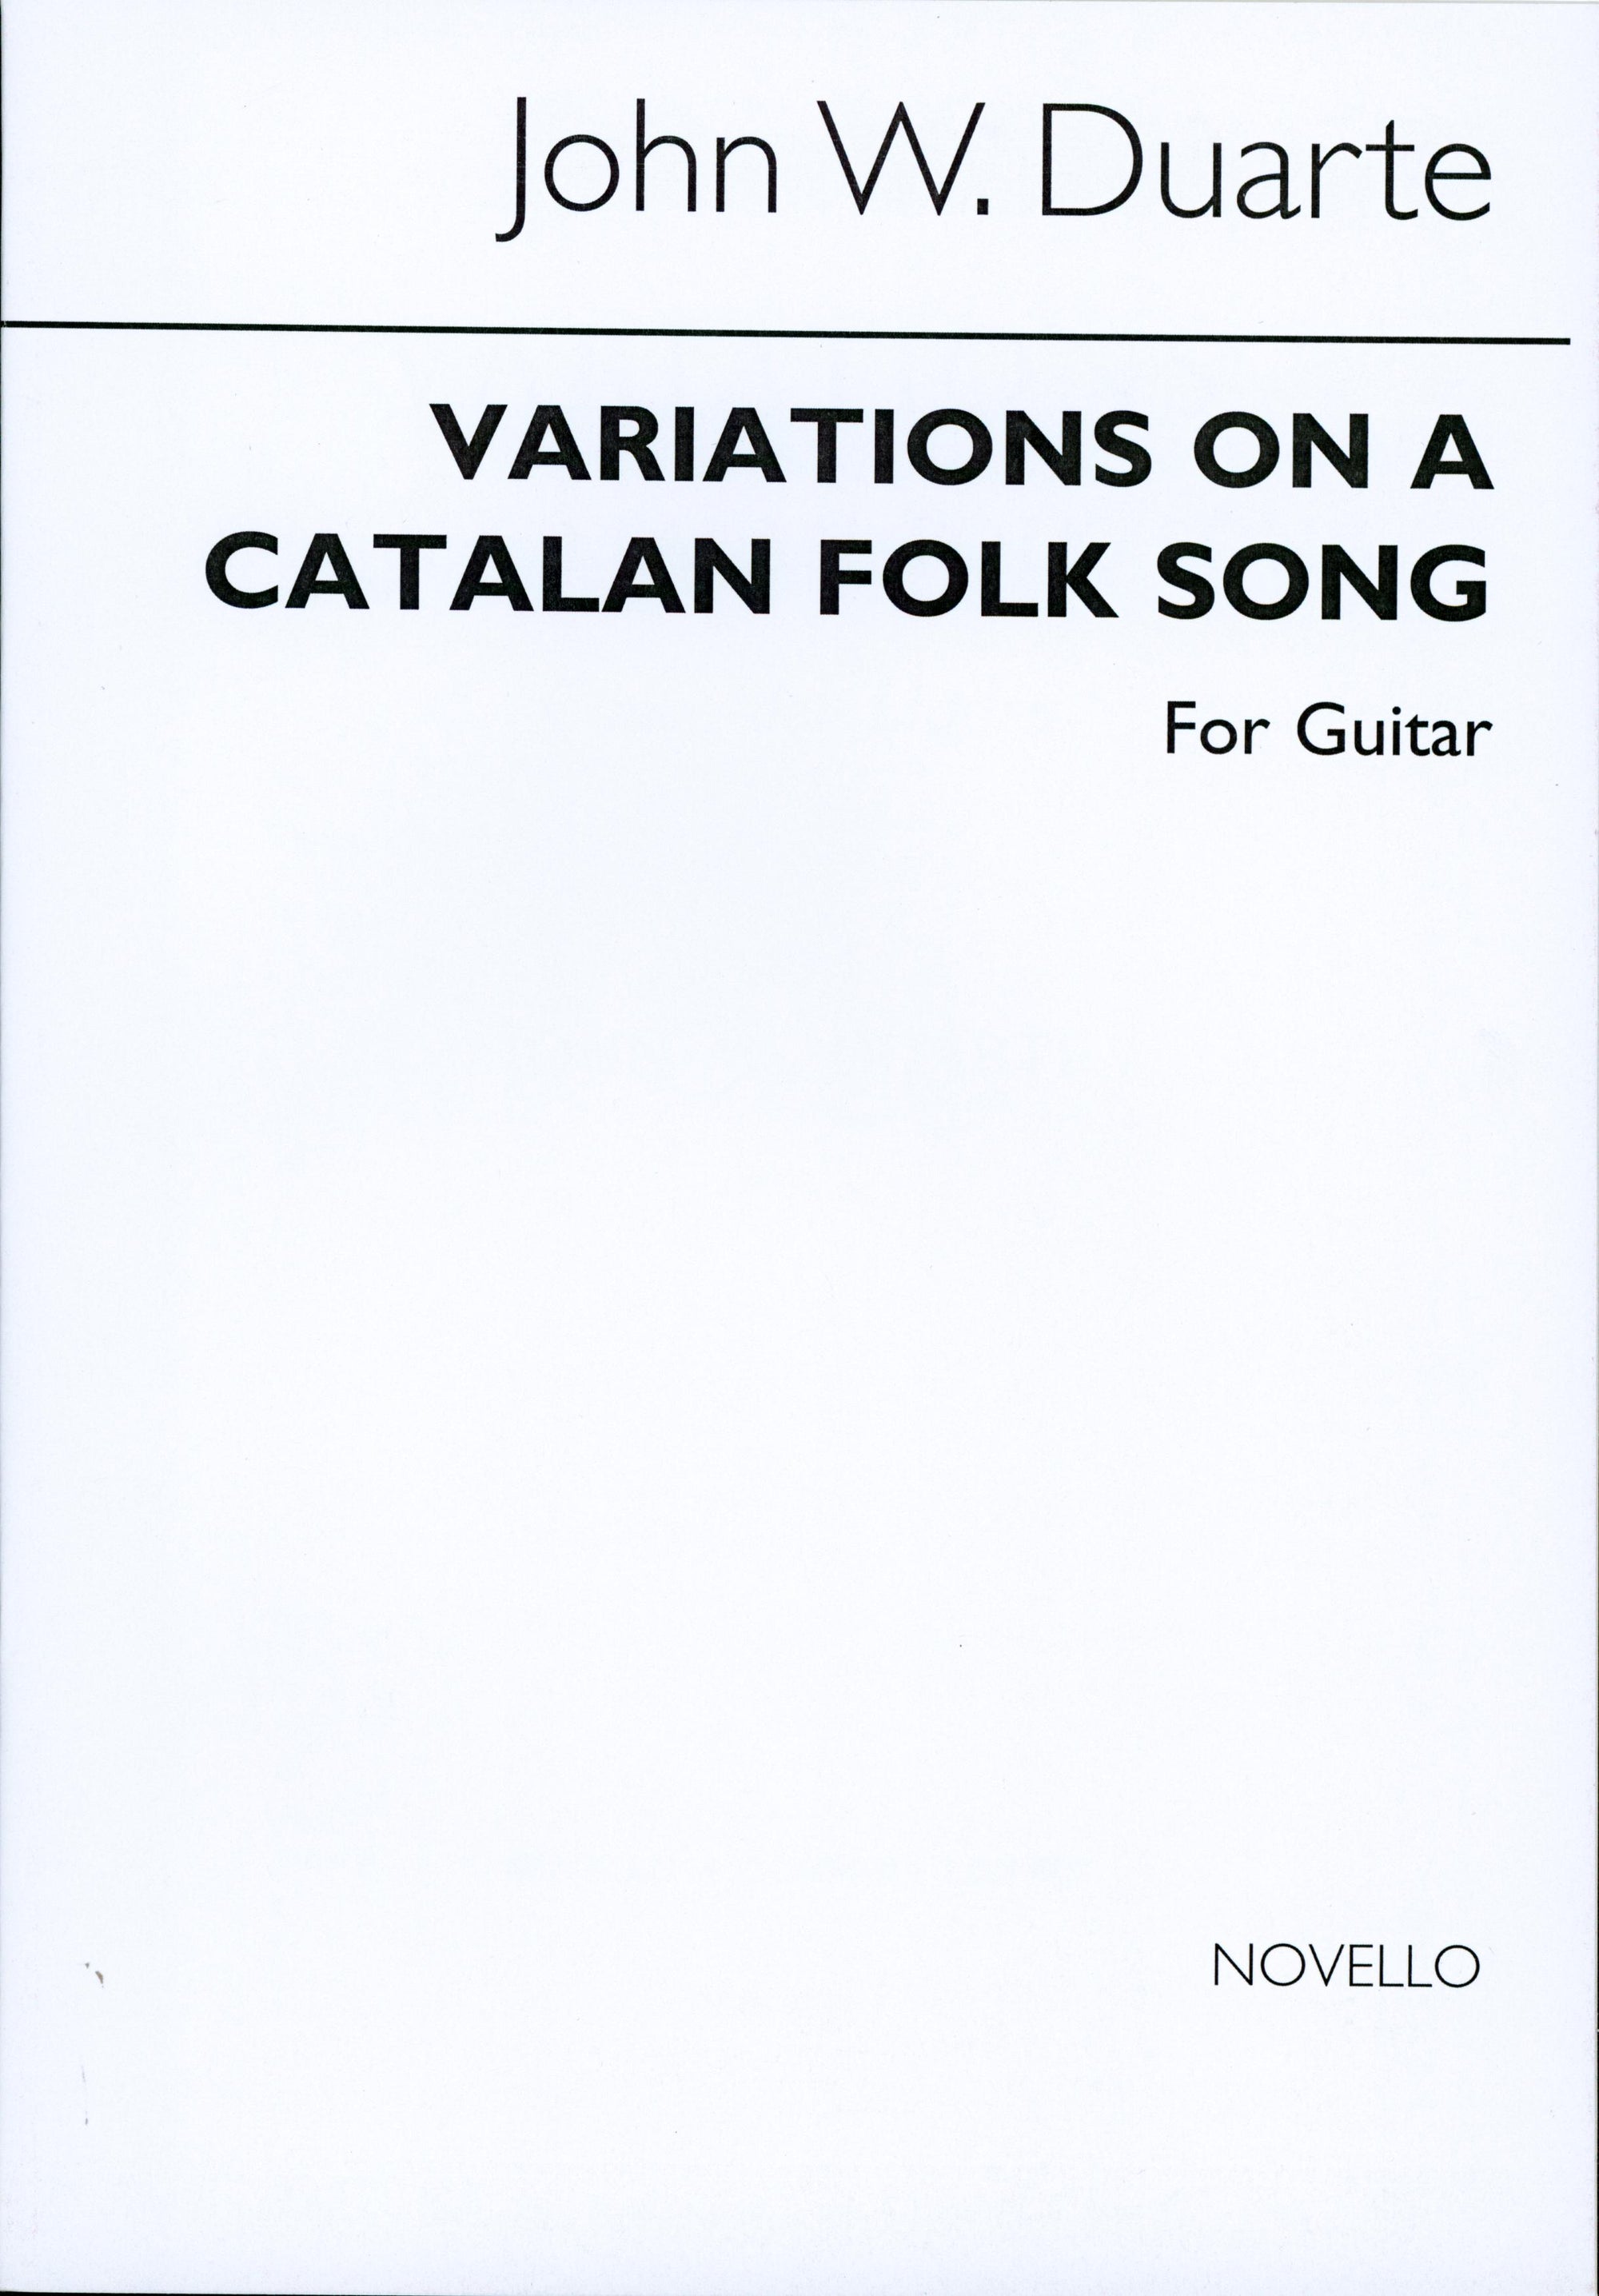 Duarte: Variations on a Catalan Folksong, Op. 25